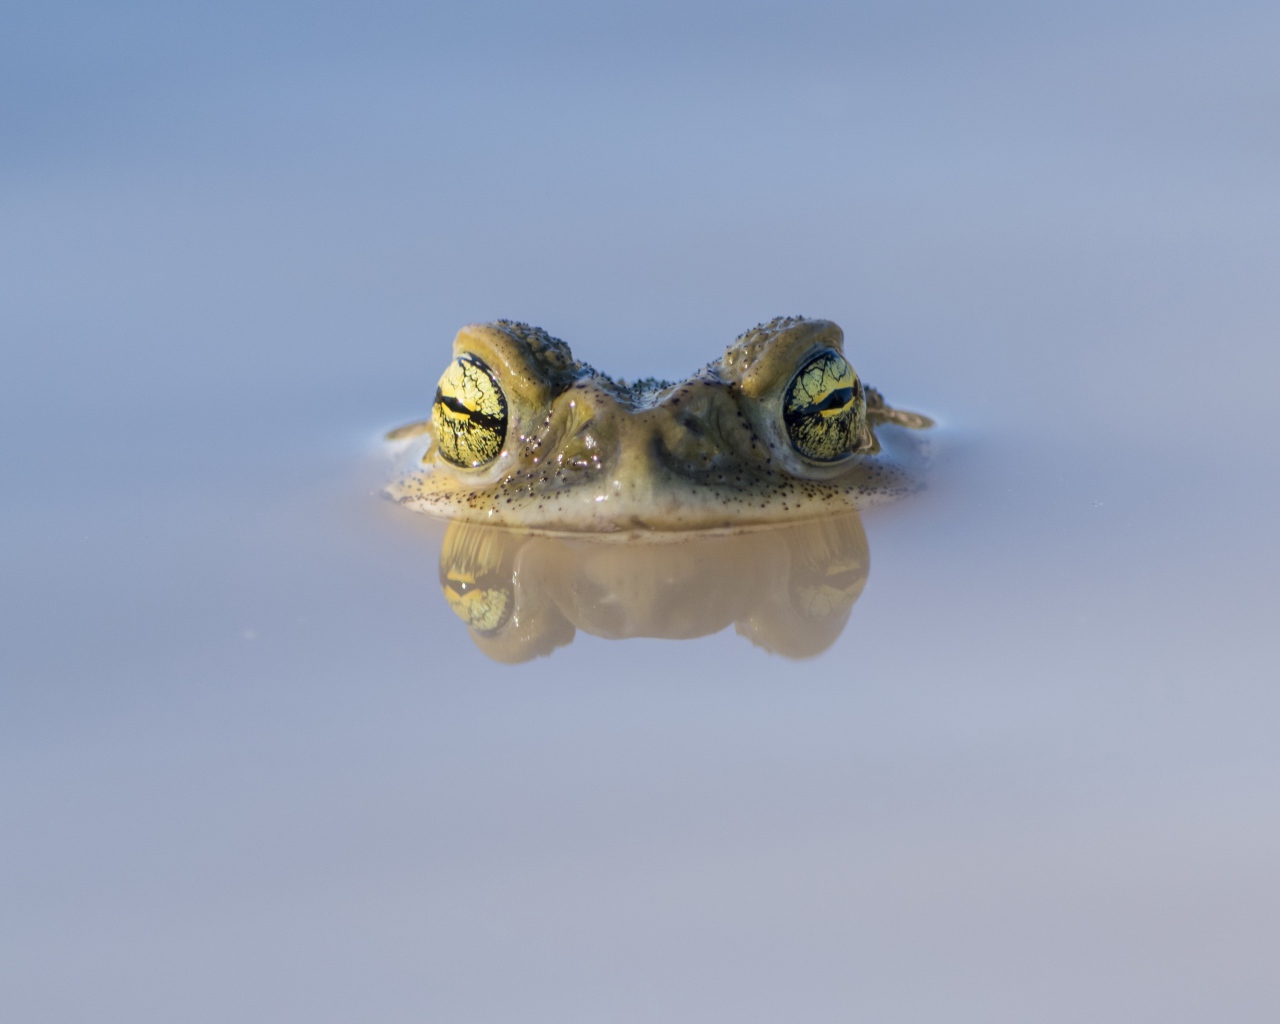 The frog's head looks out of the water